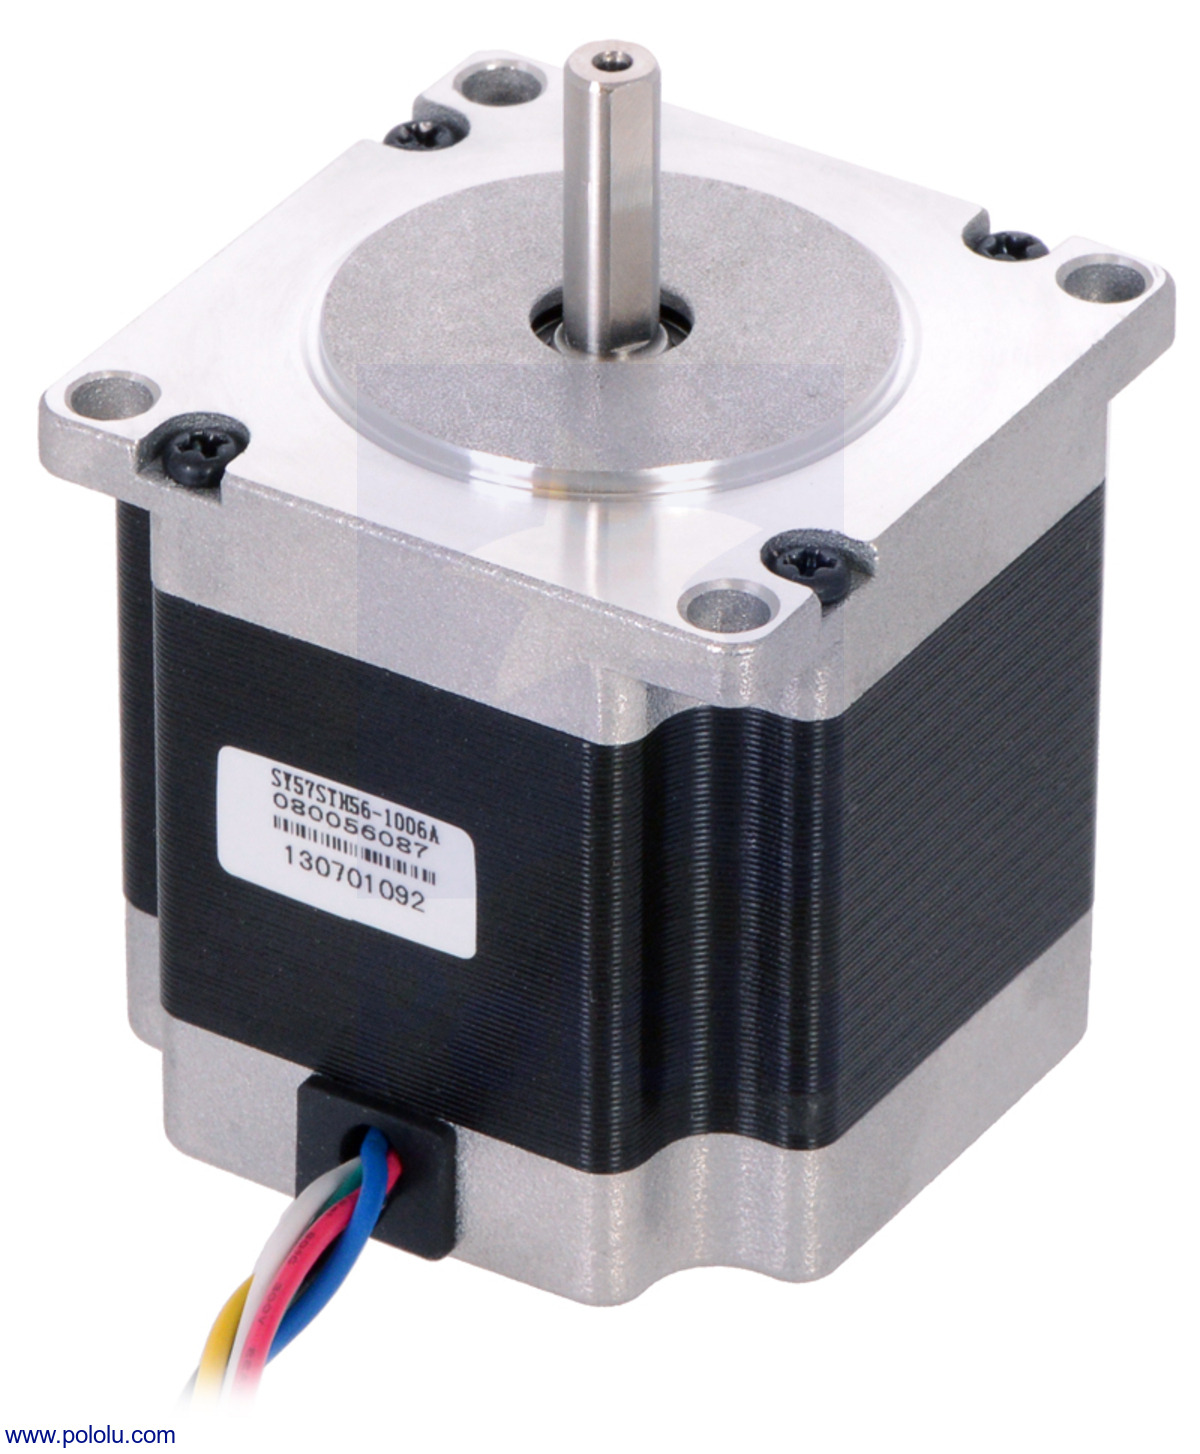 Pololu - Dimensions (in mm) of 57mm square (NEMA 23) by 76mm stepper motor.